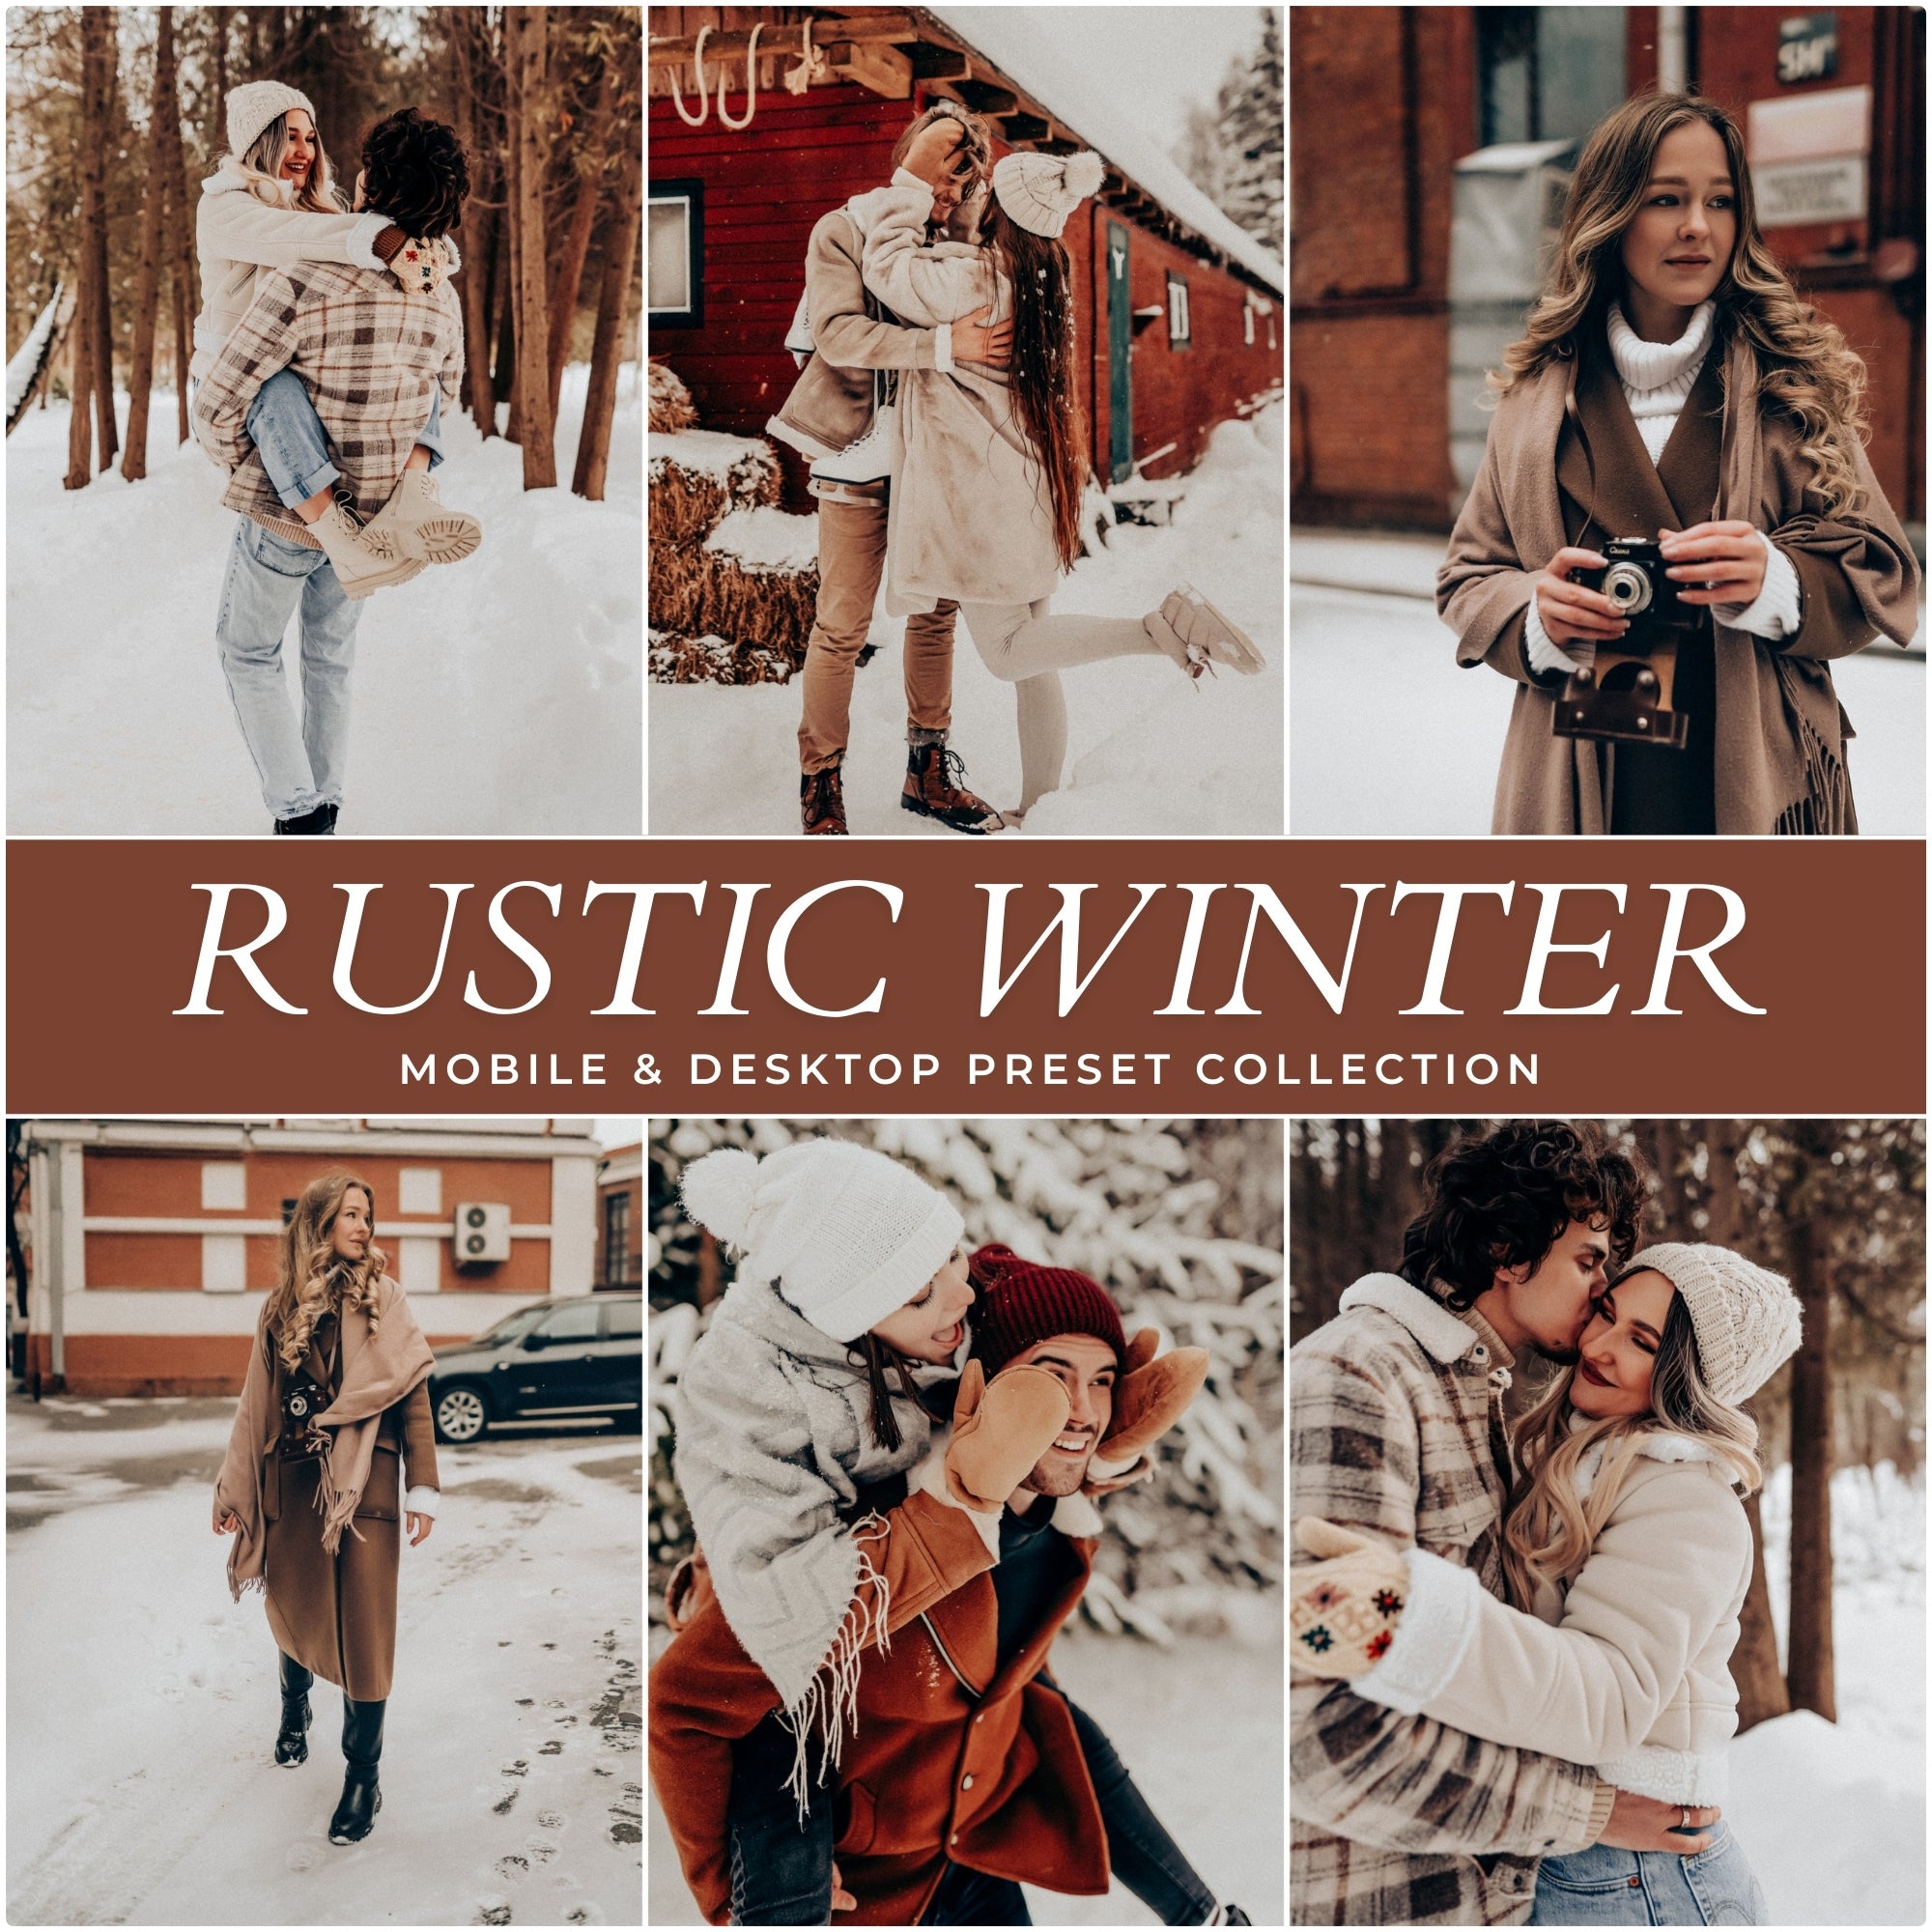 Rustic Winter Lightroom Presets For Photographers and Instagram Influencers Photo Editing In Adobe Lightroom By Lou And Marks Presets